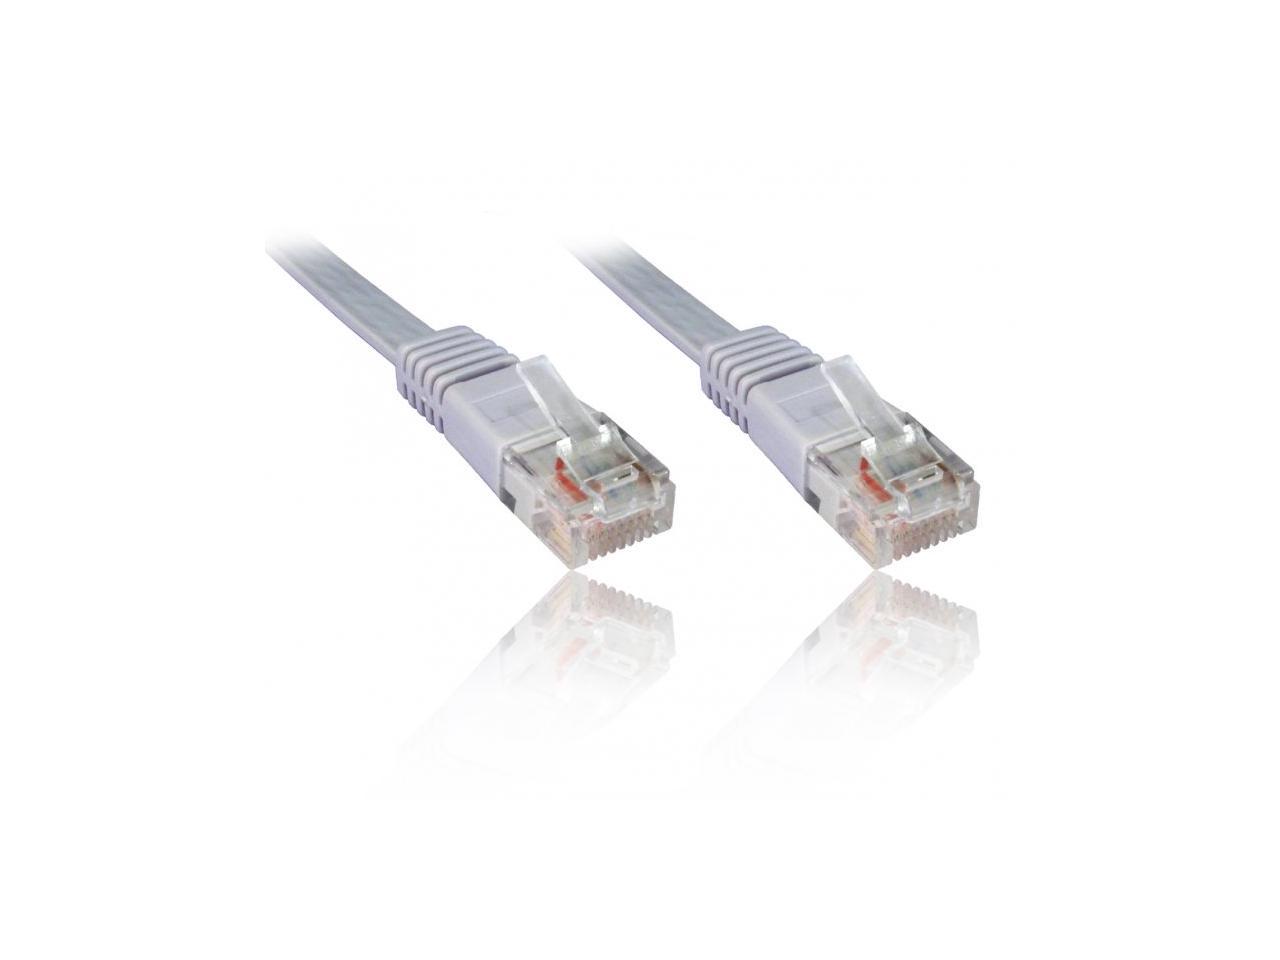 NEON Network Cable Patch Cord CAT6 RJ45 UTP Flat 30ft. Grey Model SX499C